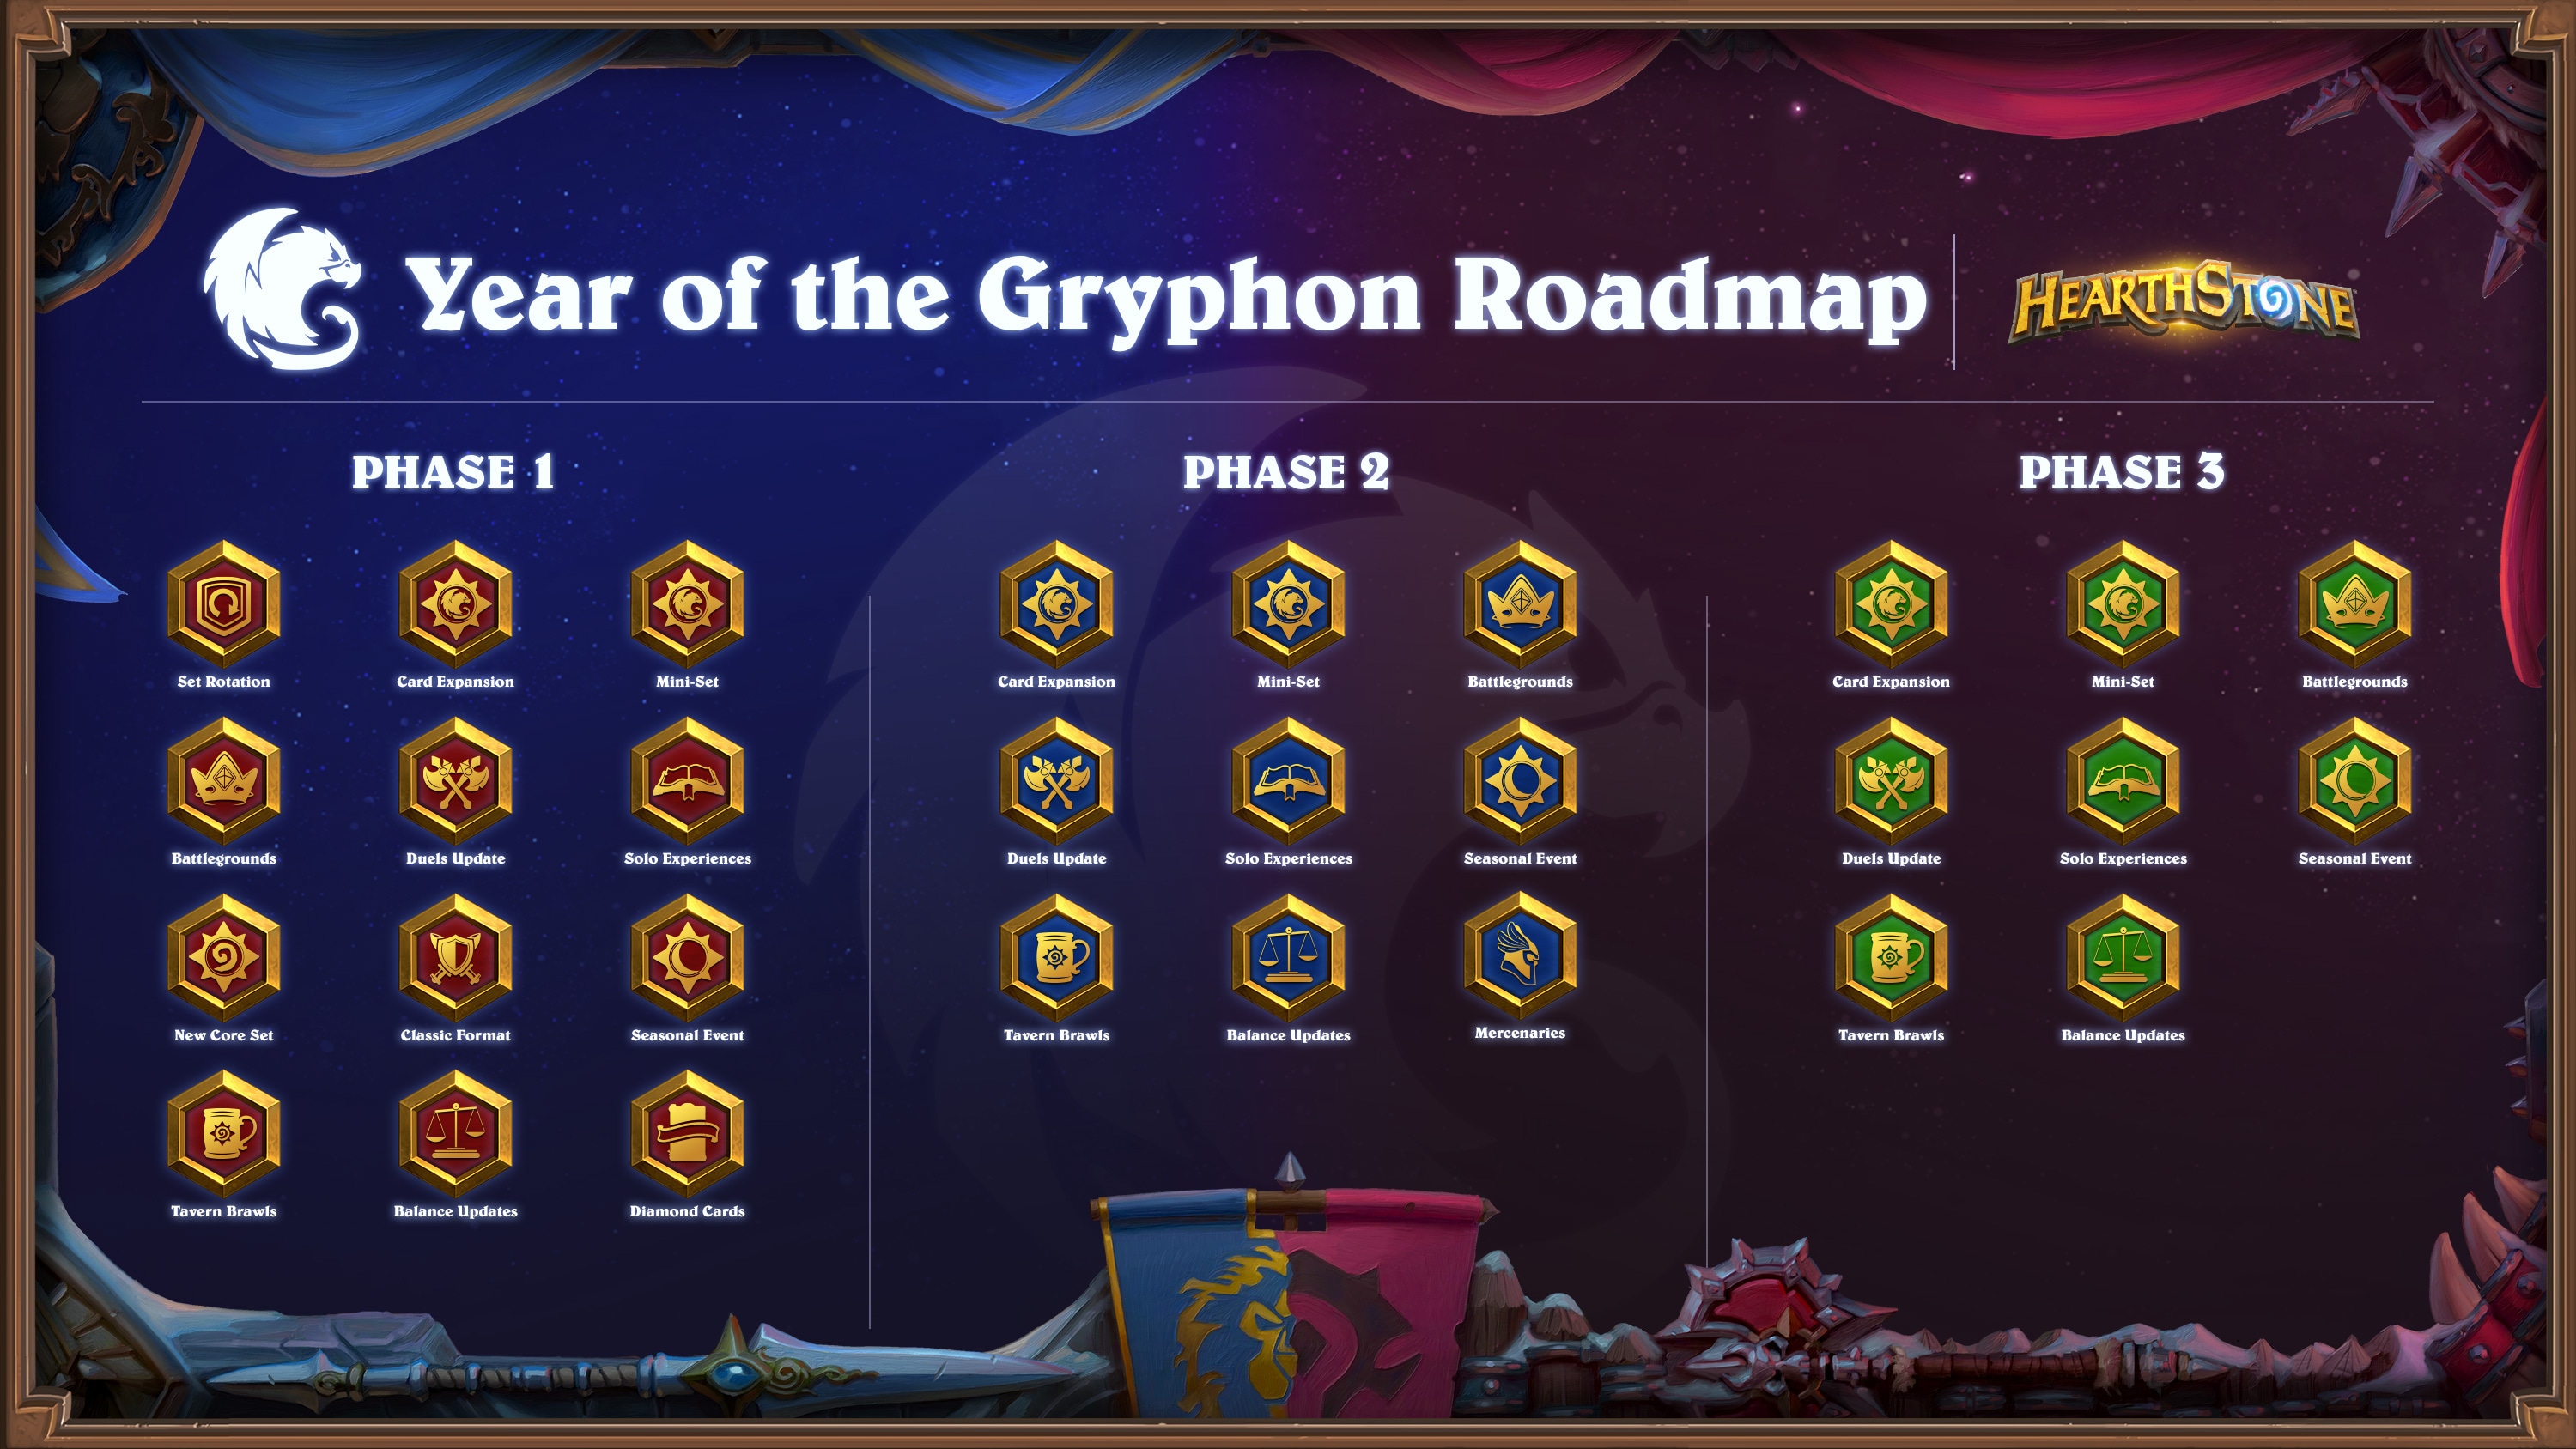 Year of the Gryphon Roadmap!